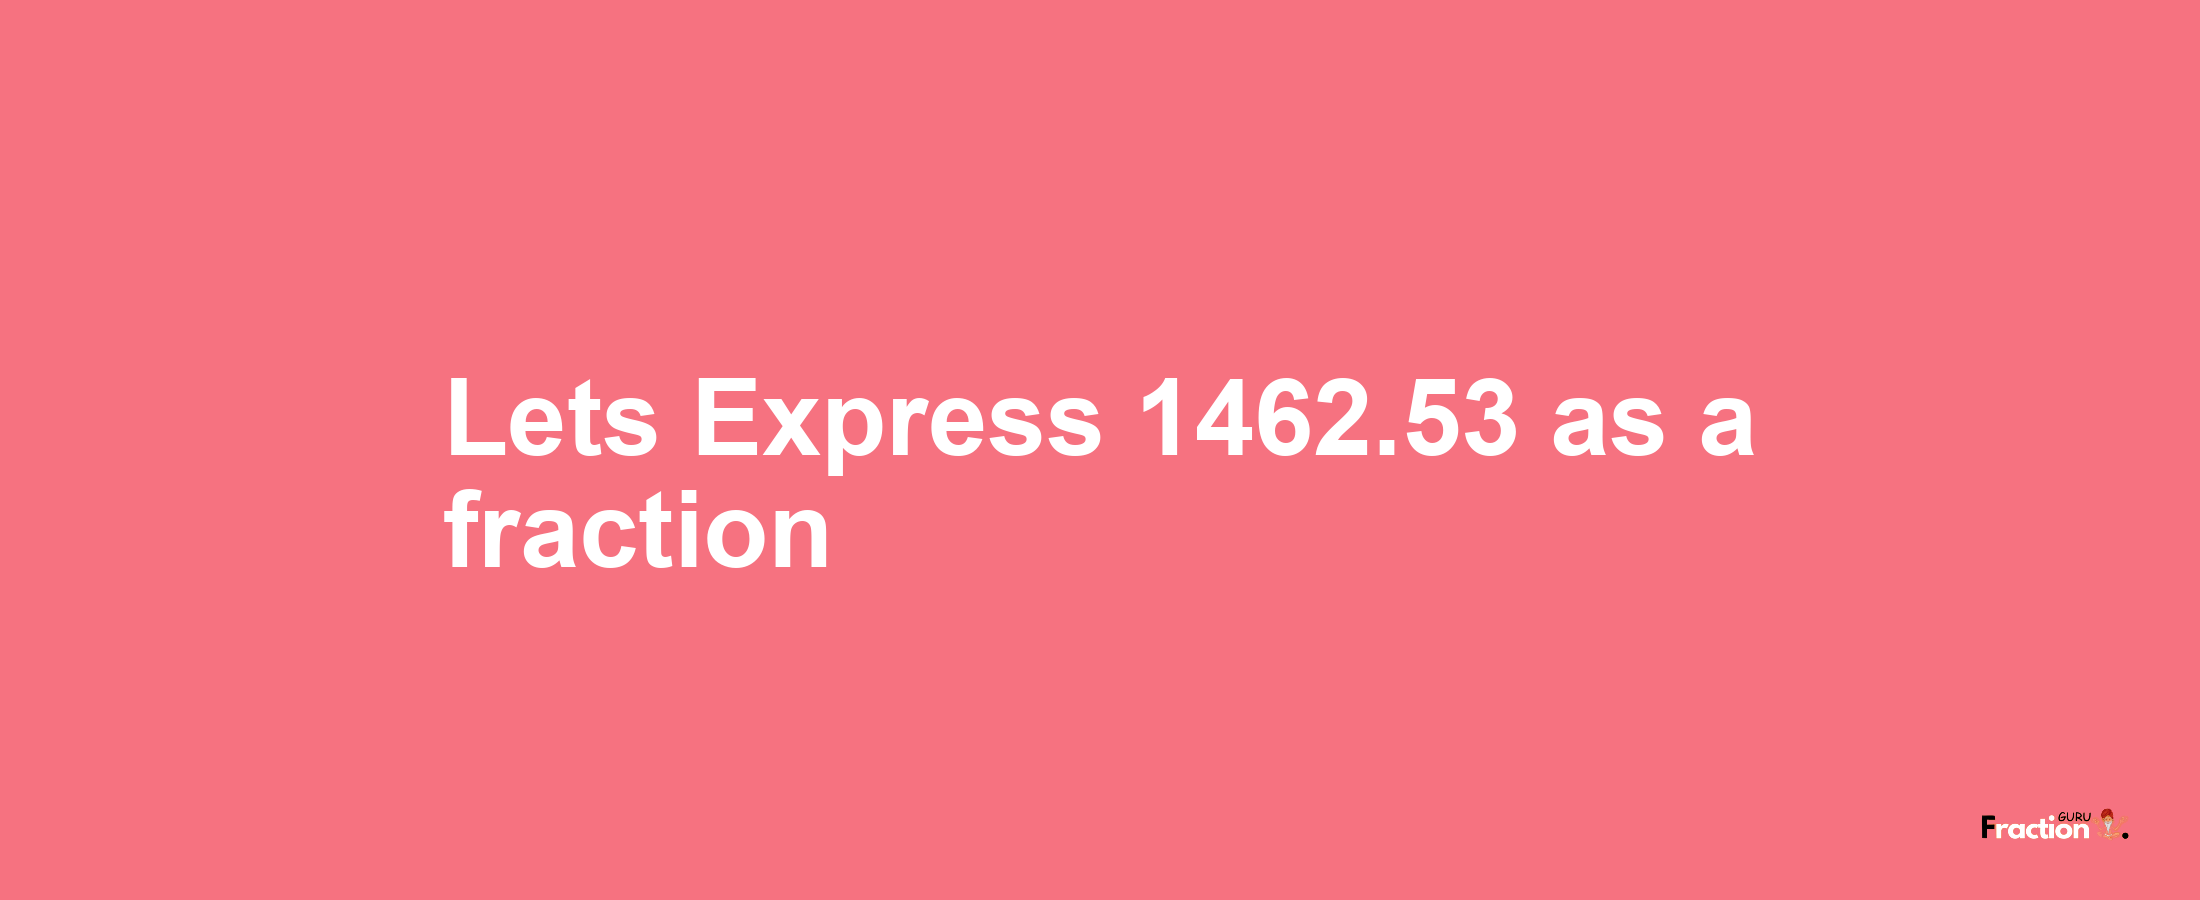 Lets Express 1462.53 as afraction